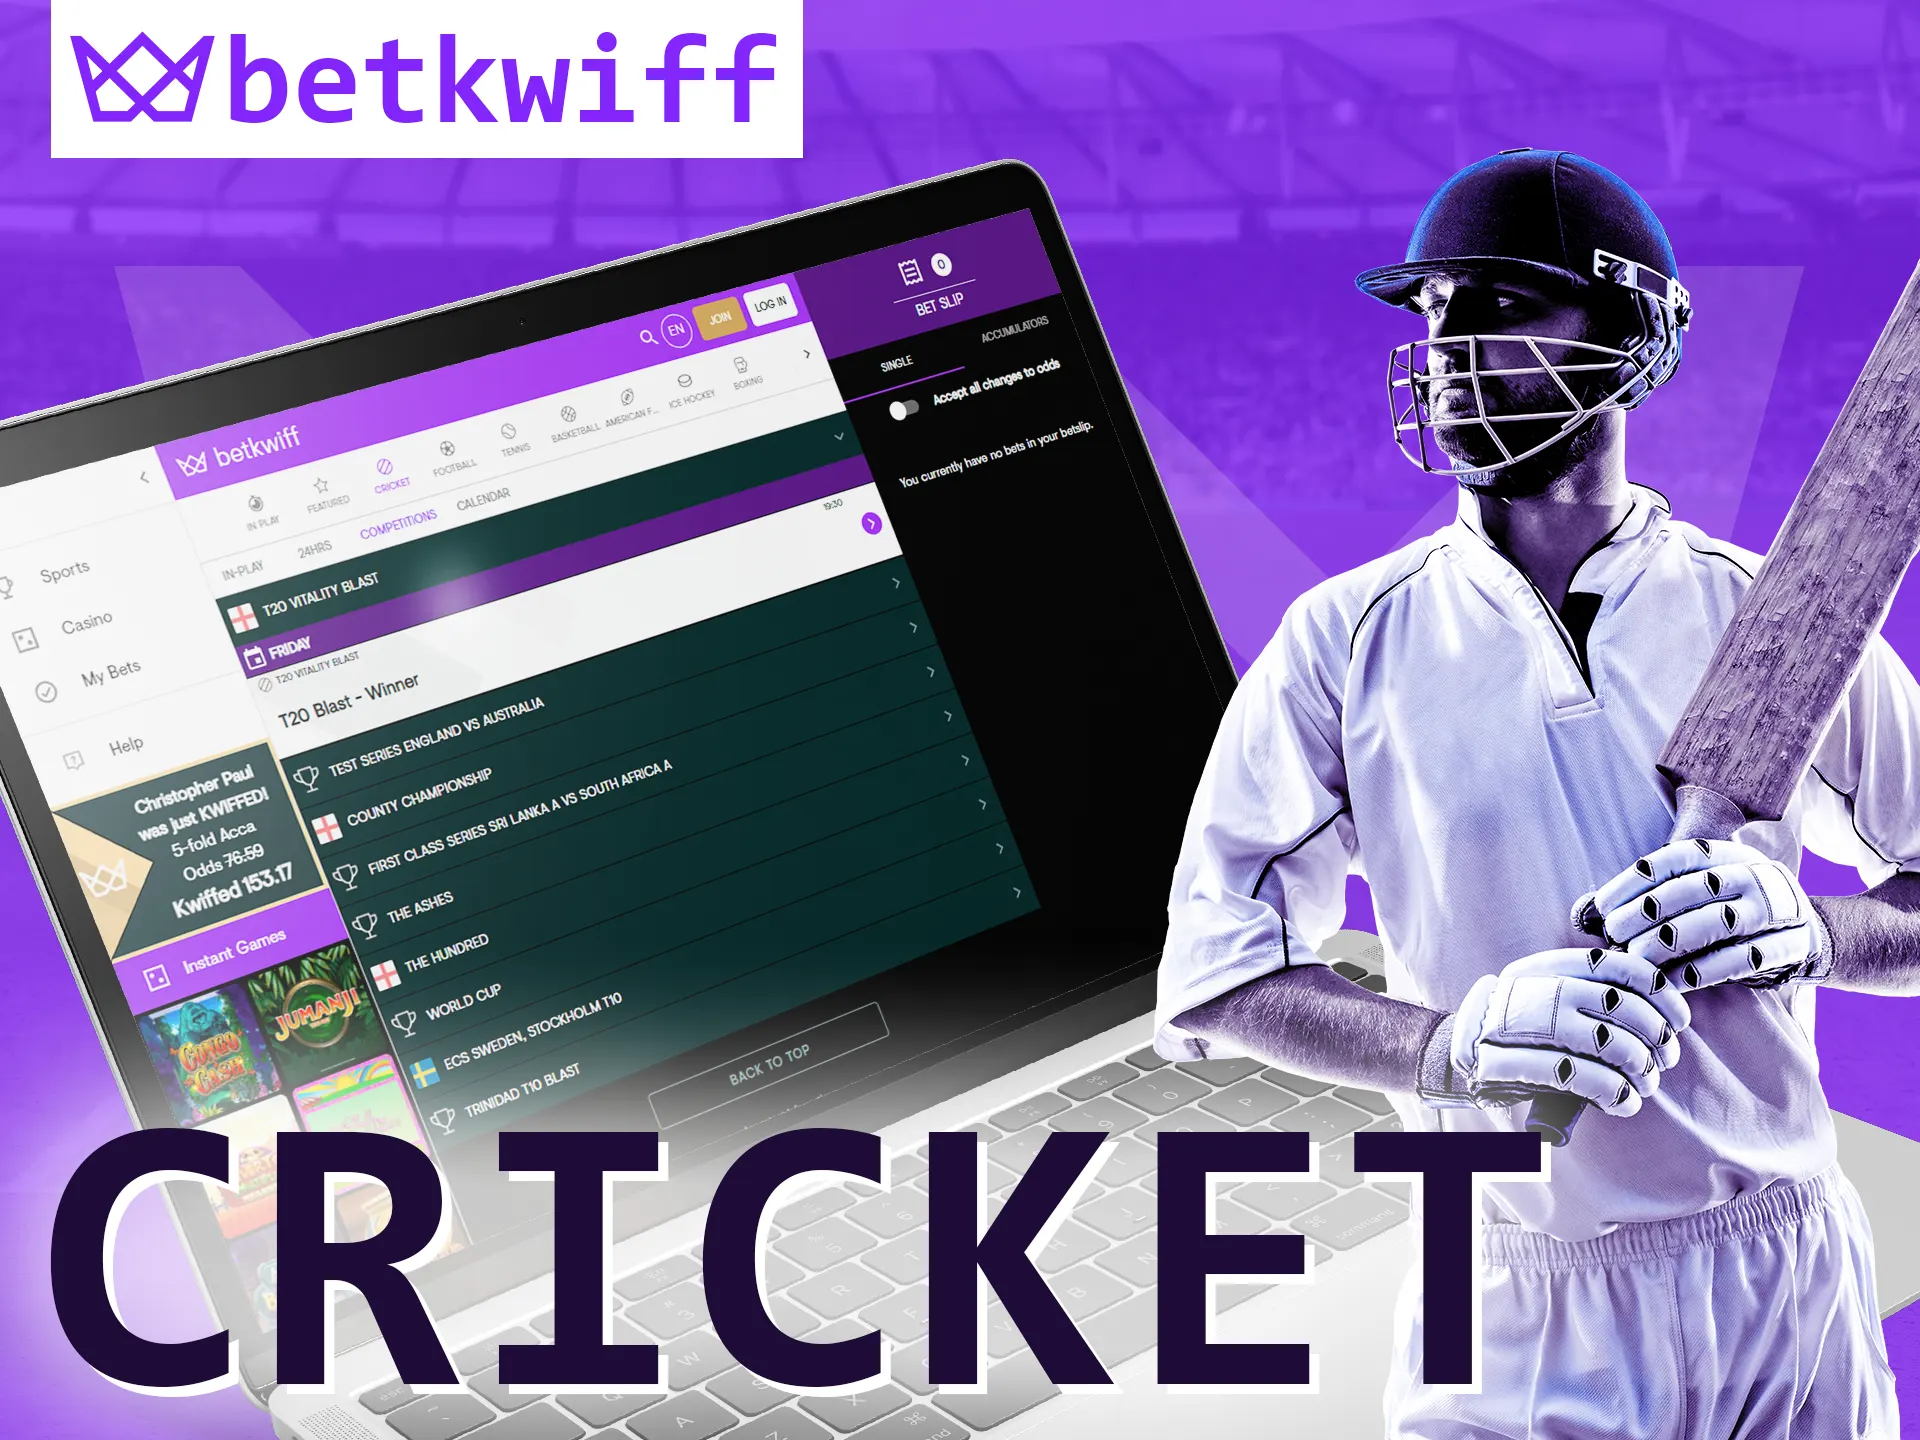 With Betkwiff, bet on cricket and support your favorite team.